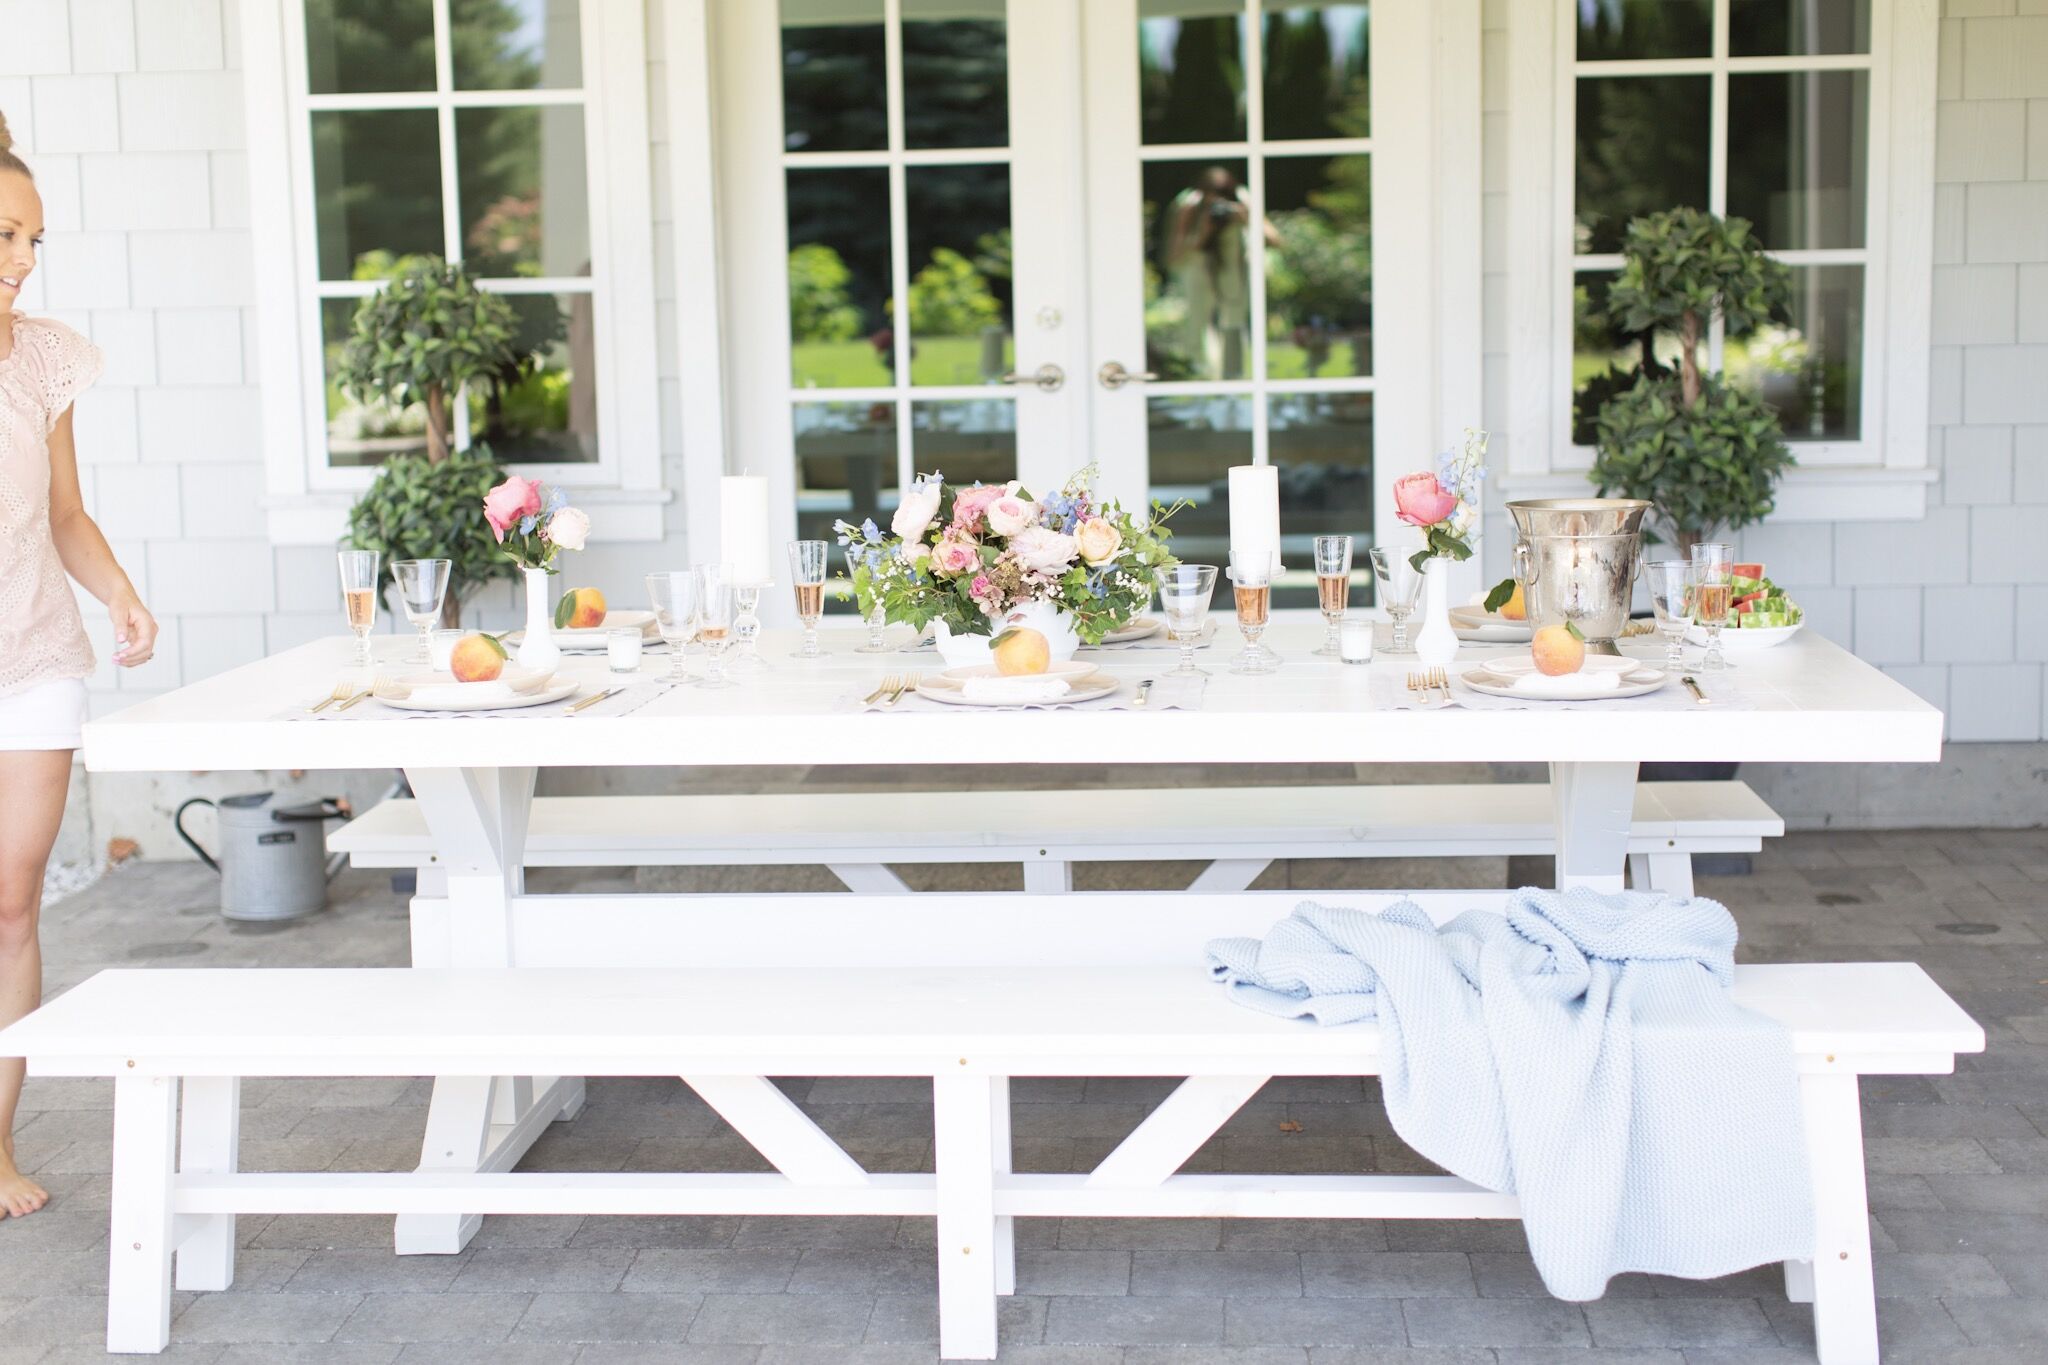 How to throw the best garden party complete with a white picnic table, a wine-paired menu, fresh flowers and a hostess schedule